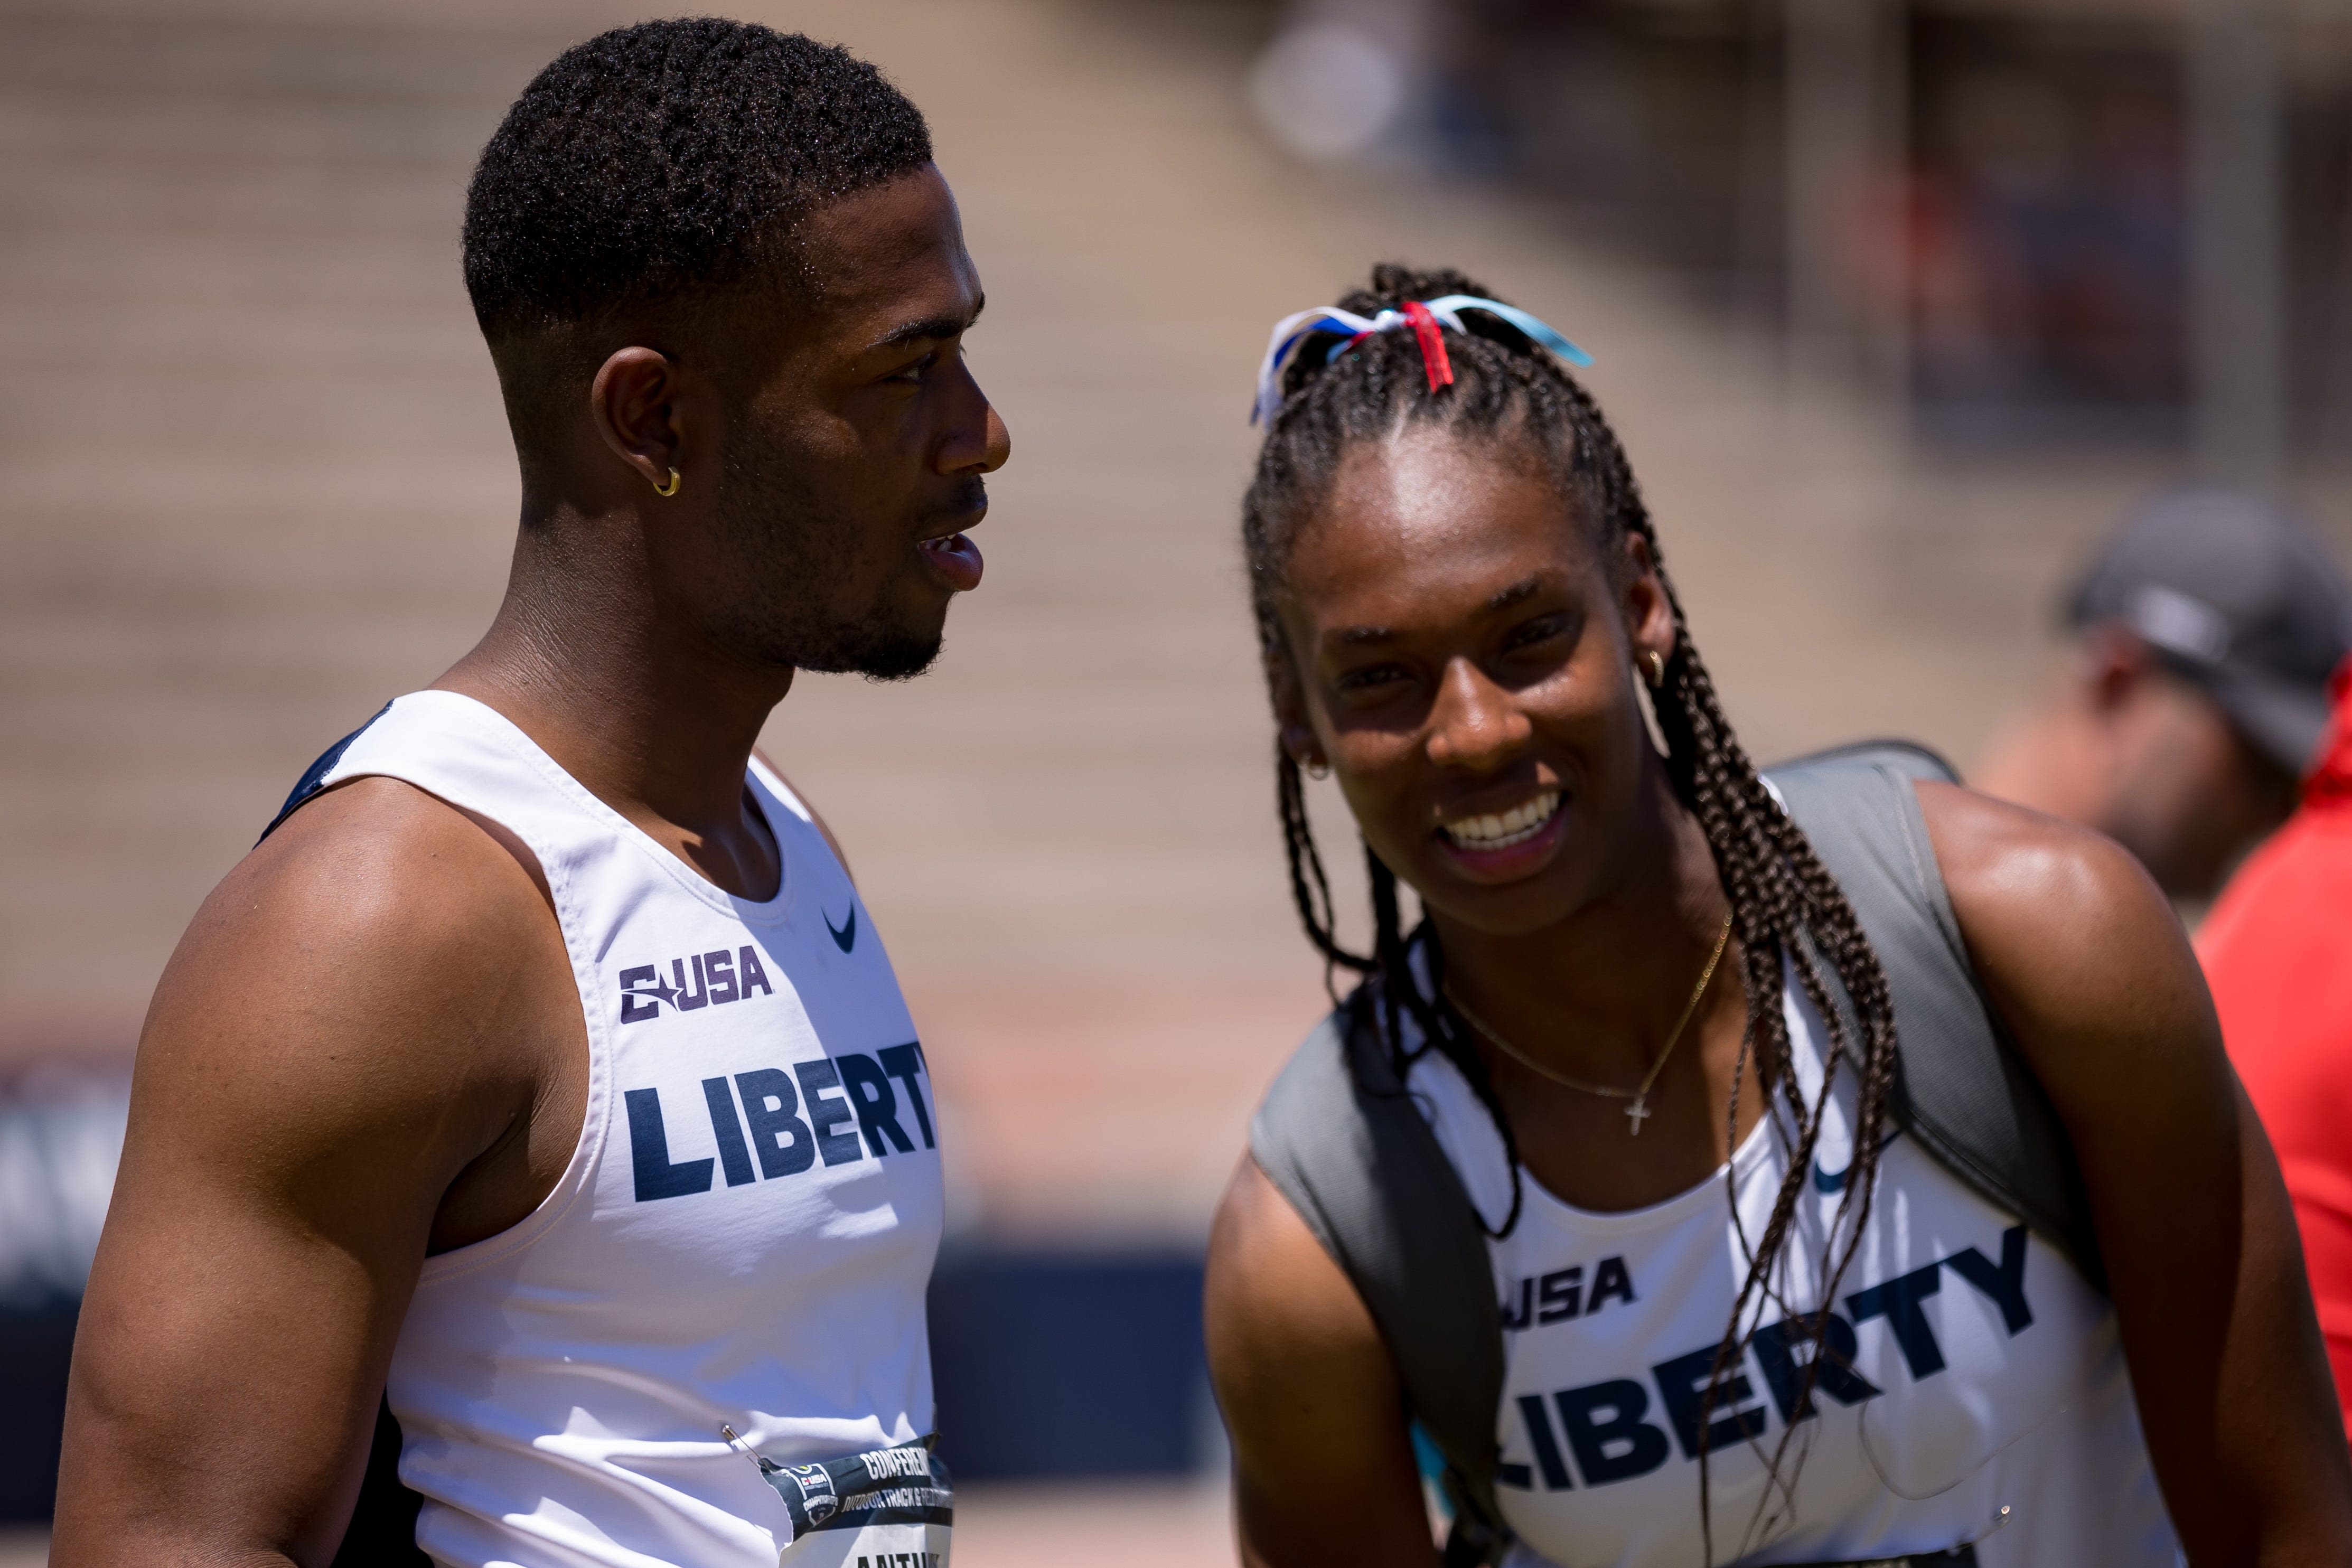 Siblings from Liberty sweep CUSA multievents on Day 2 of championships